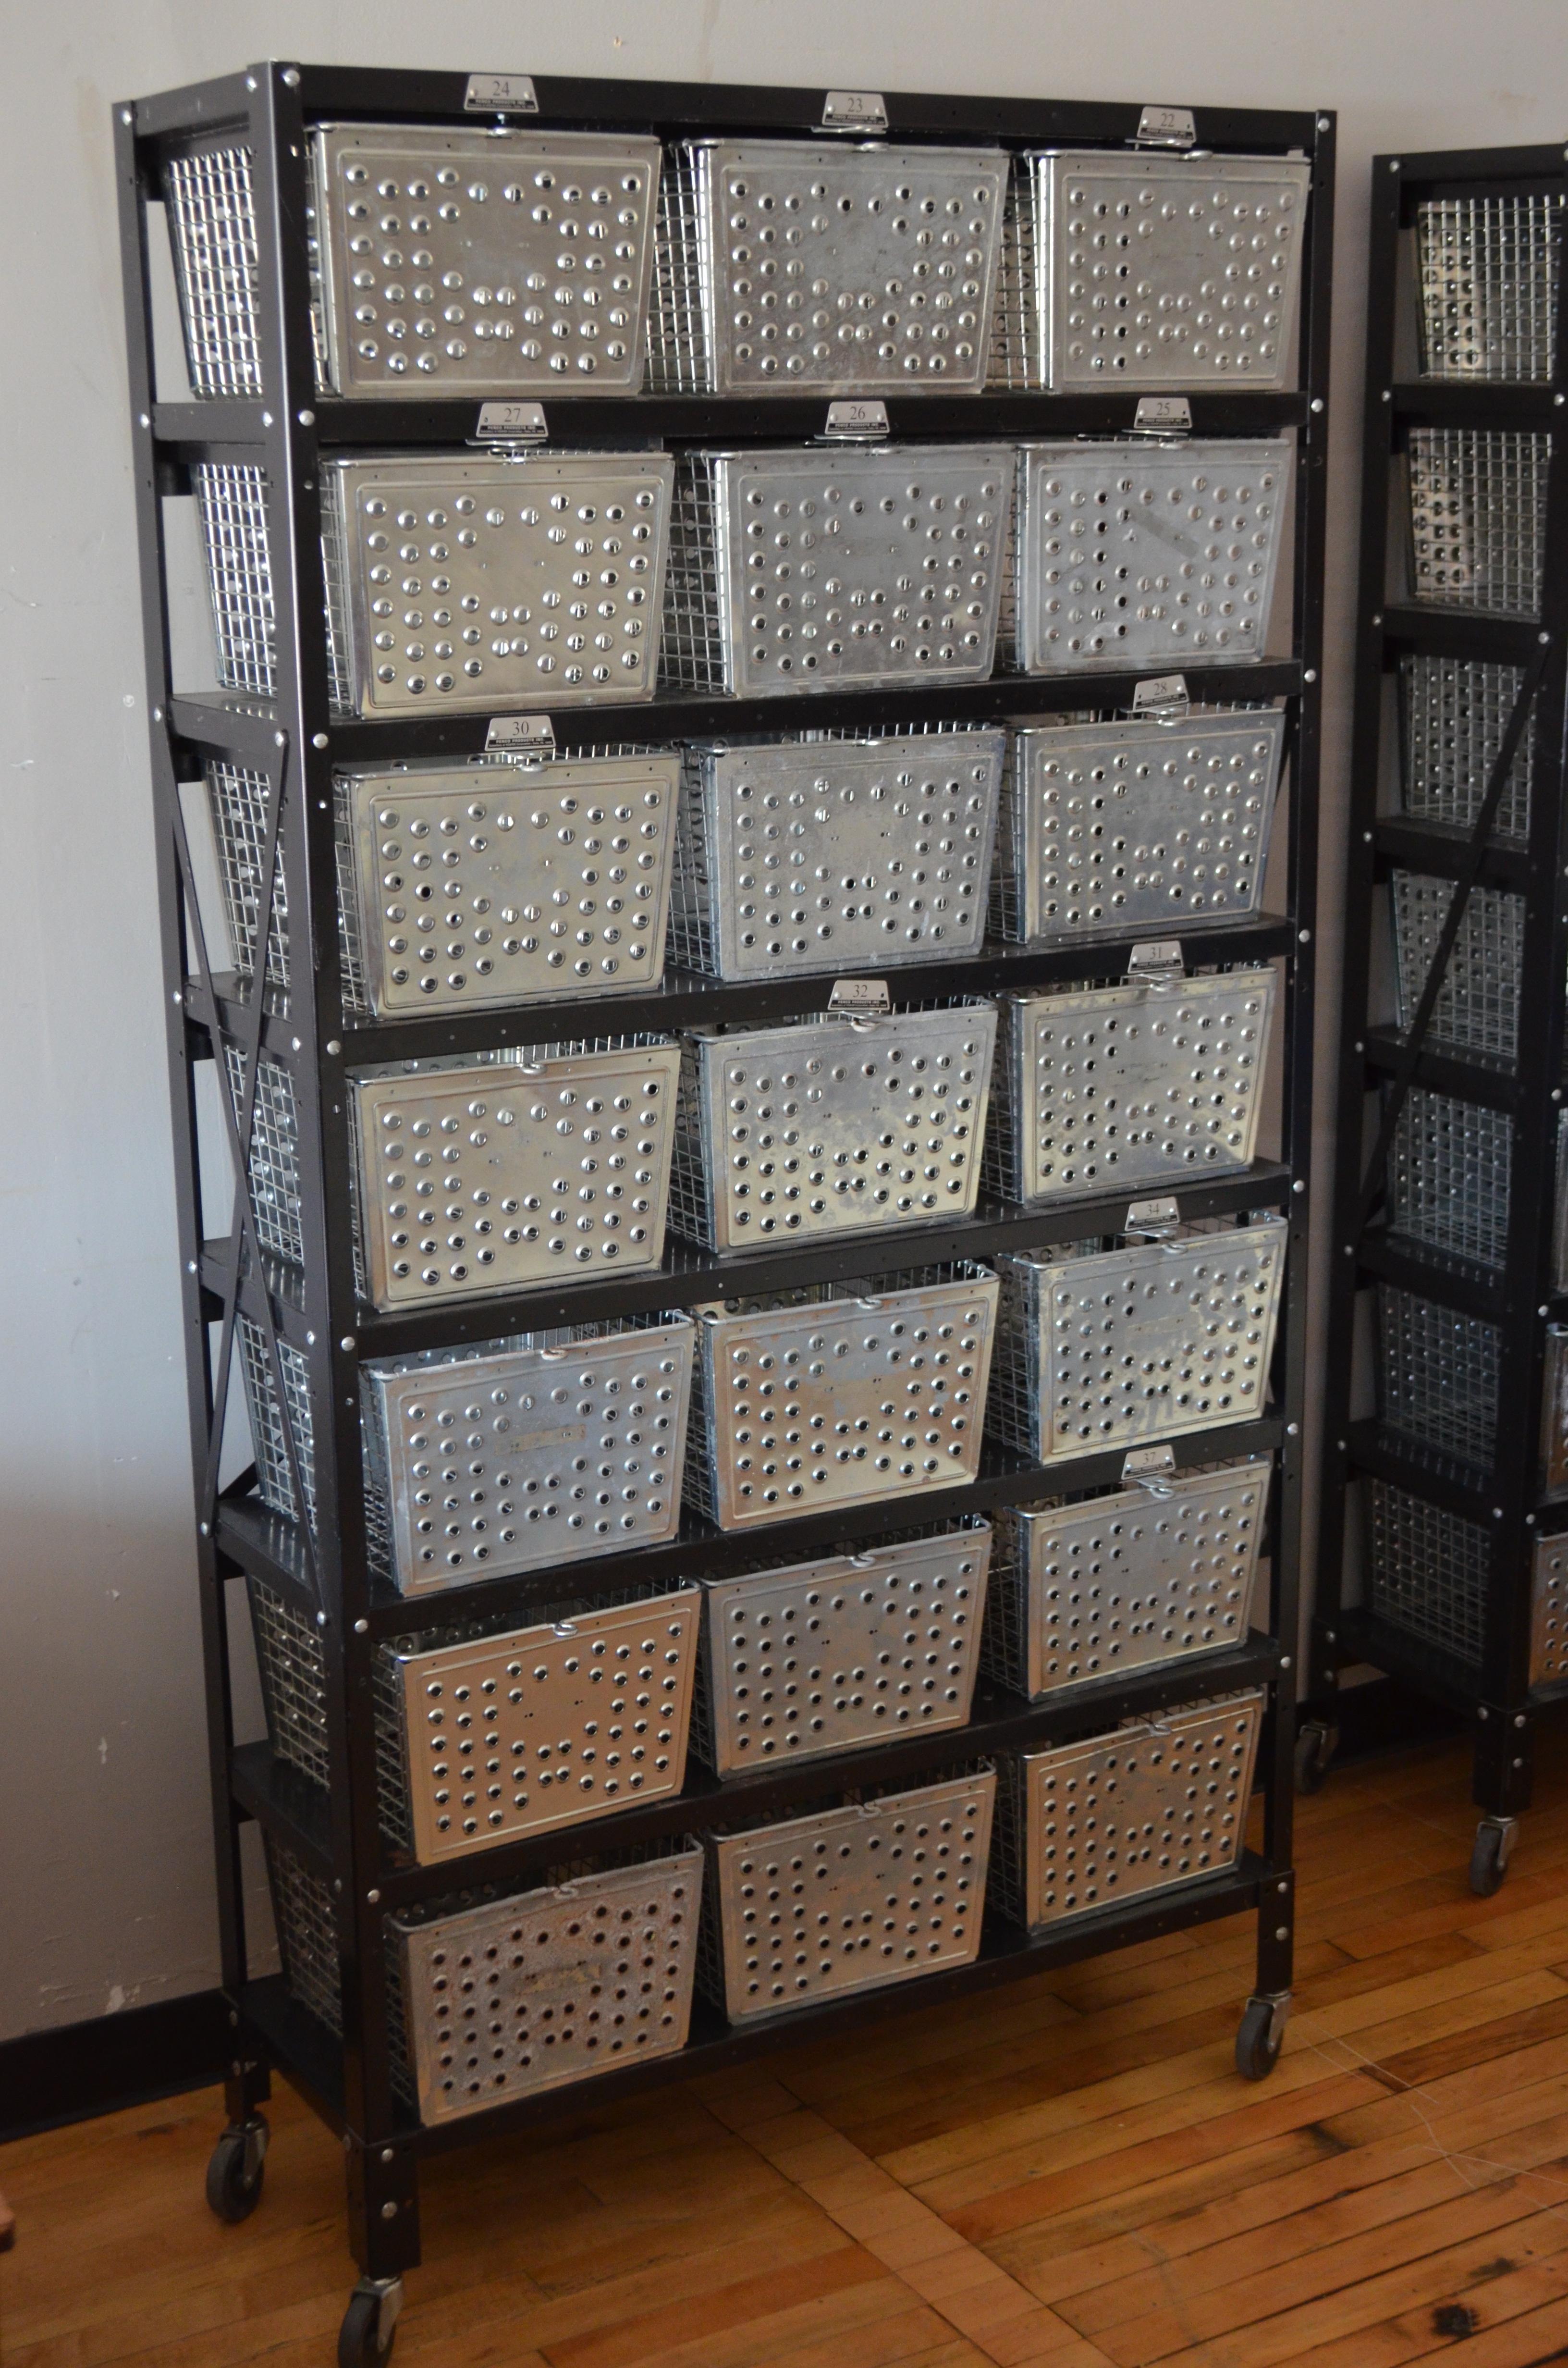 Storage unit containing 21 steel wire baskets on a black-painted steel rack, 2 units available. Rolls around smoothly on pivoting rubber wheels. Use in the bathroom for towels, toiletries, paper rolls and more. An entranceway storage bonanza